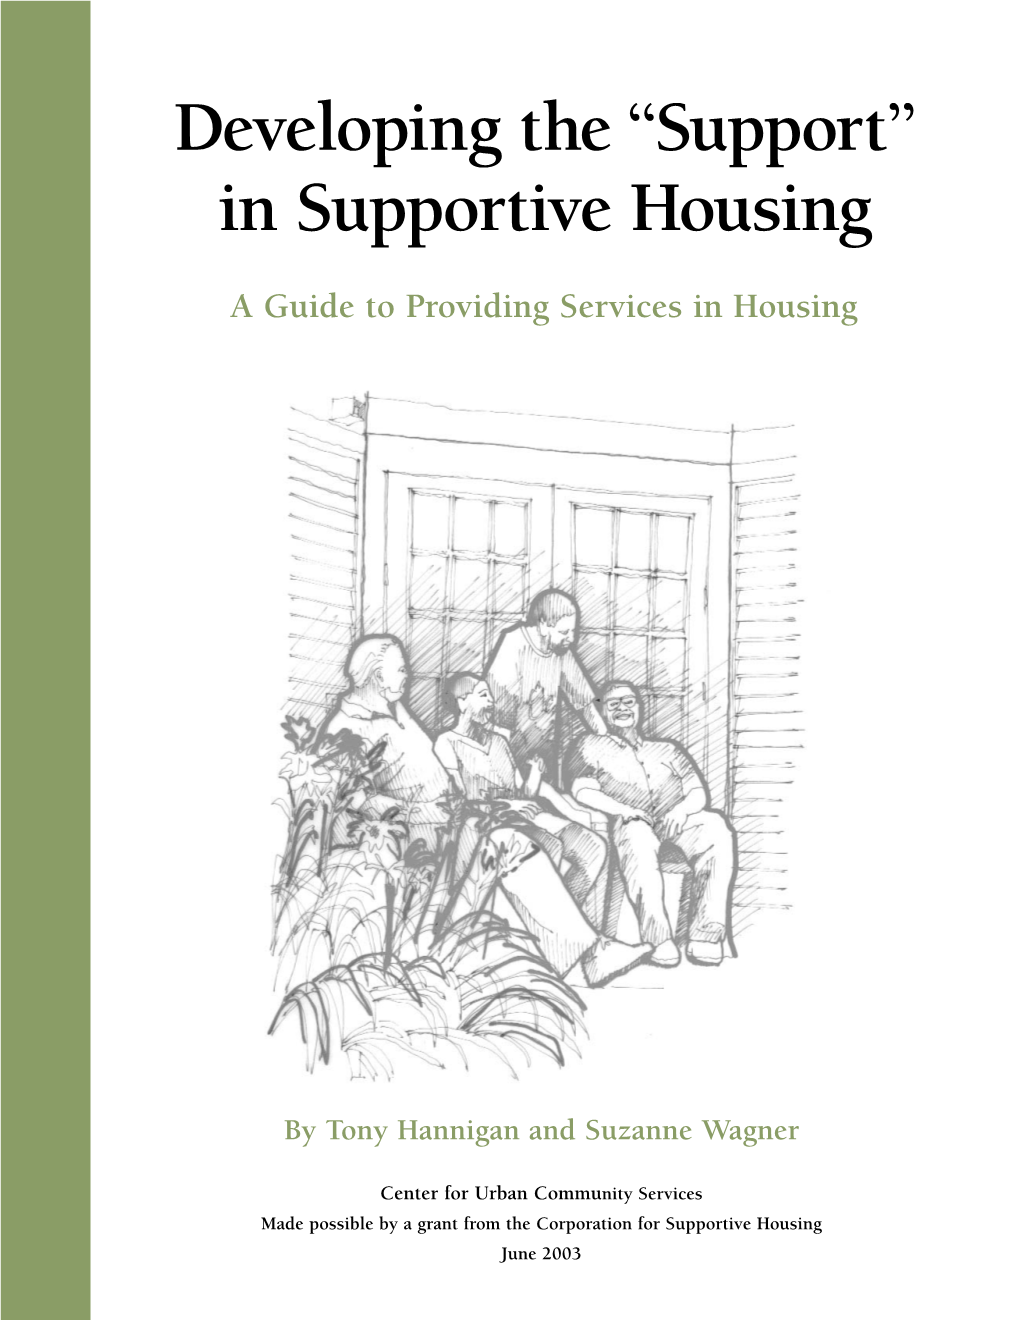 Developing the “Support” in Supportive Housing